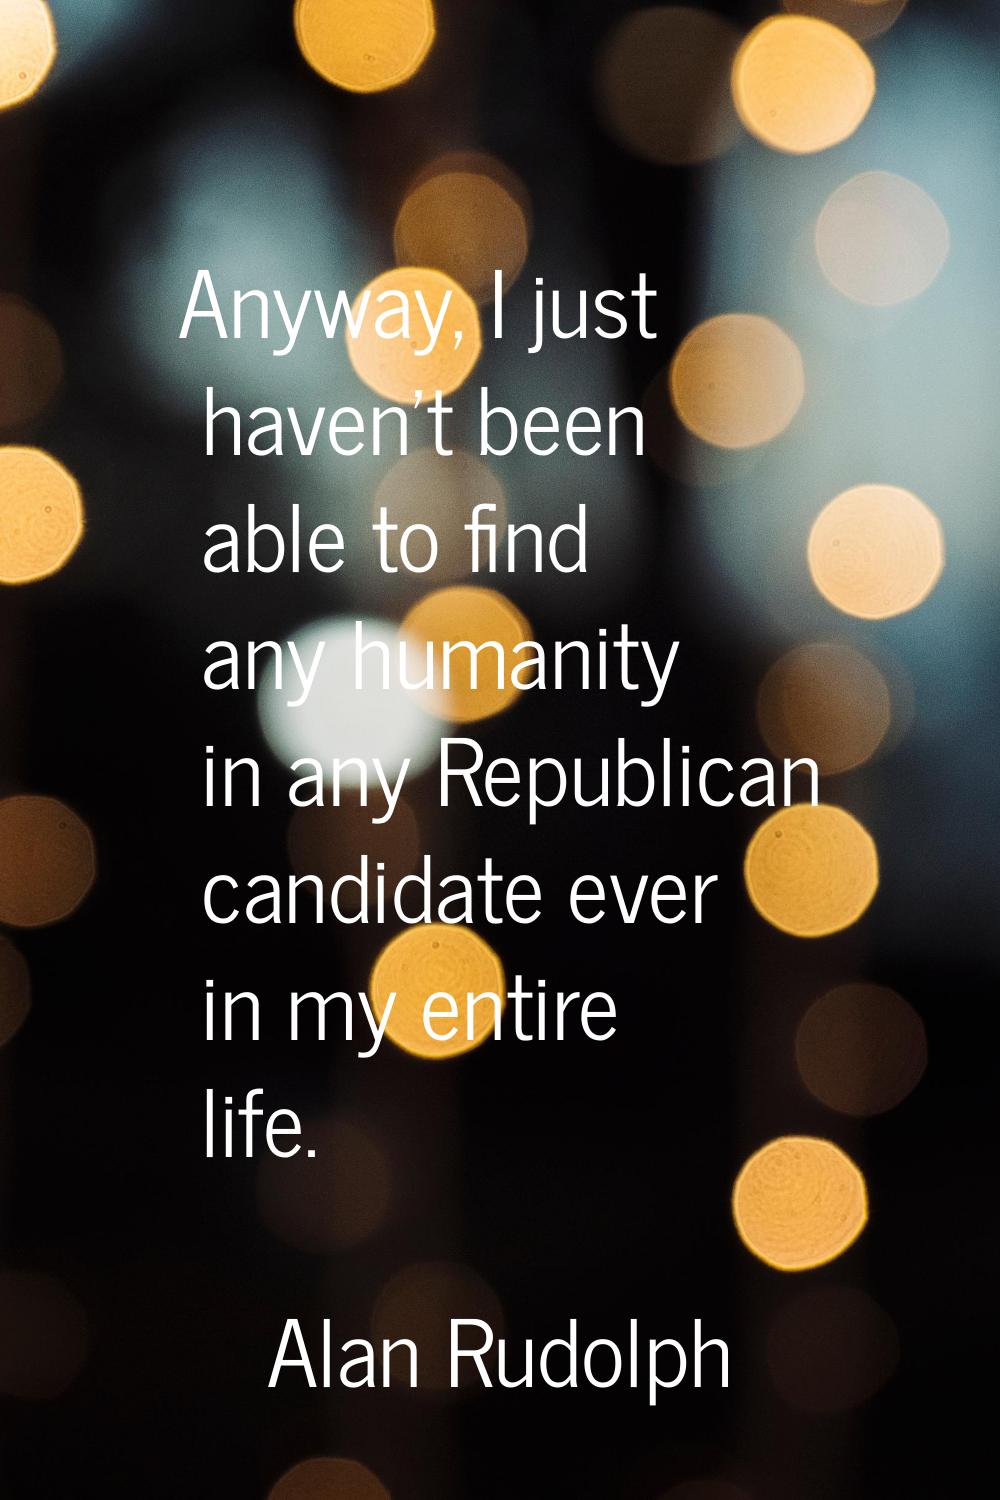 Anyway, I just haven't been able to find any humanity in any Republican candidate ever in my entire